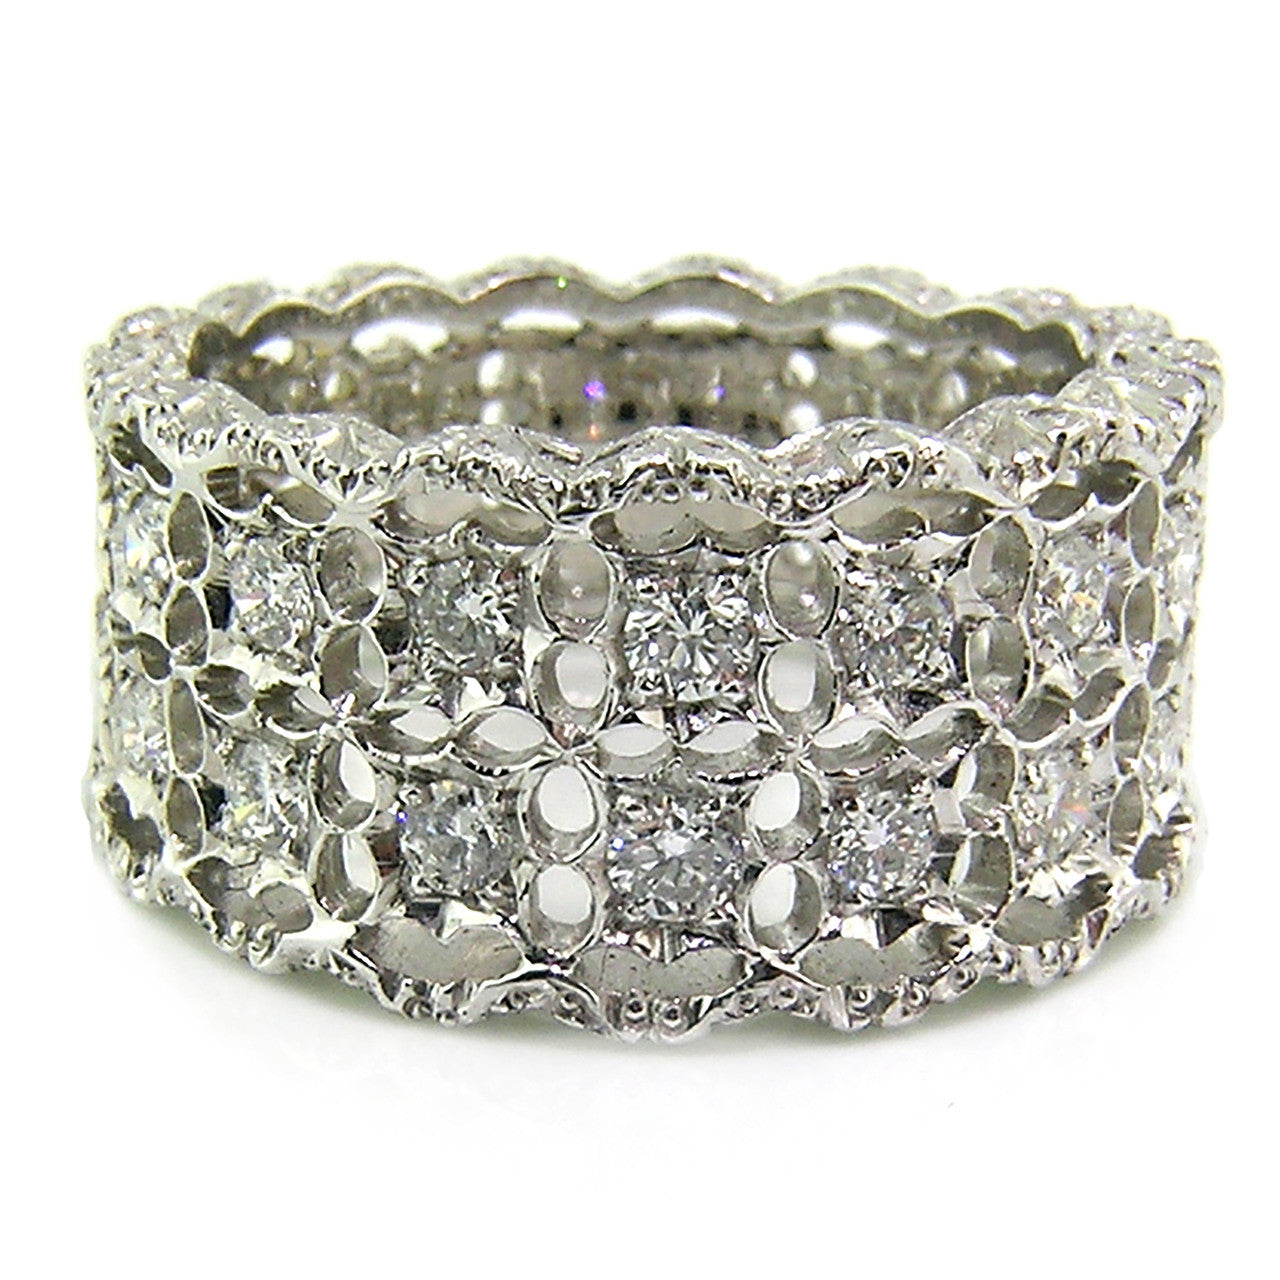 Stefania Florentine Engraved Diamond Band made in Italy for Cynthia Scott Jewelry